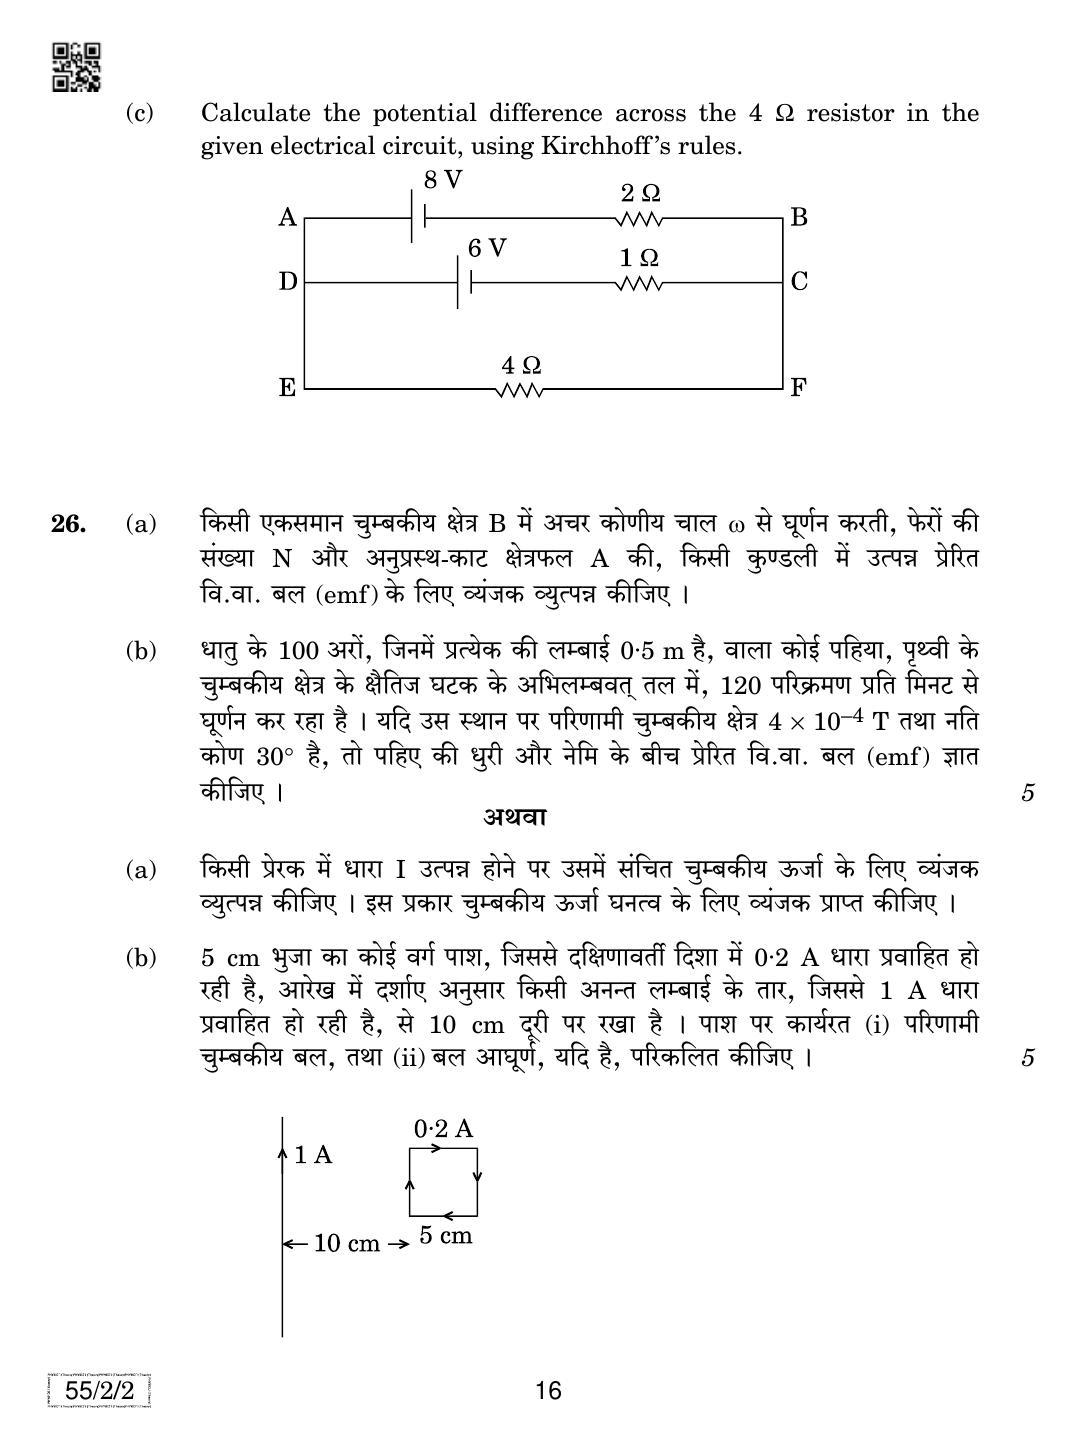 CBSE Class 12 55-2-2 Physics 2019 Question Paper - Page 16